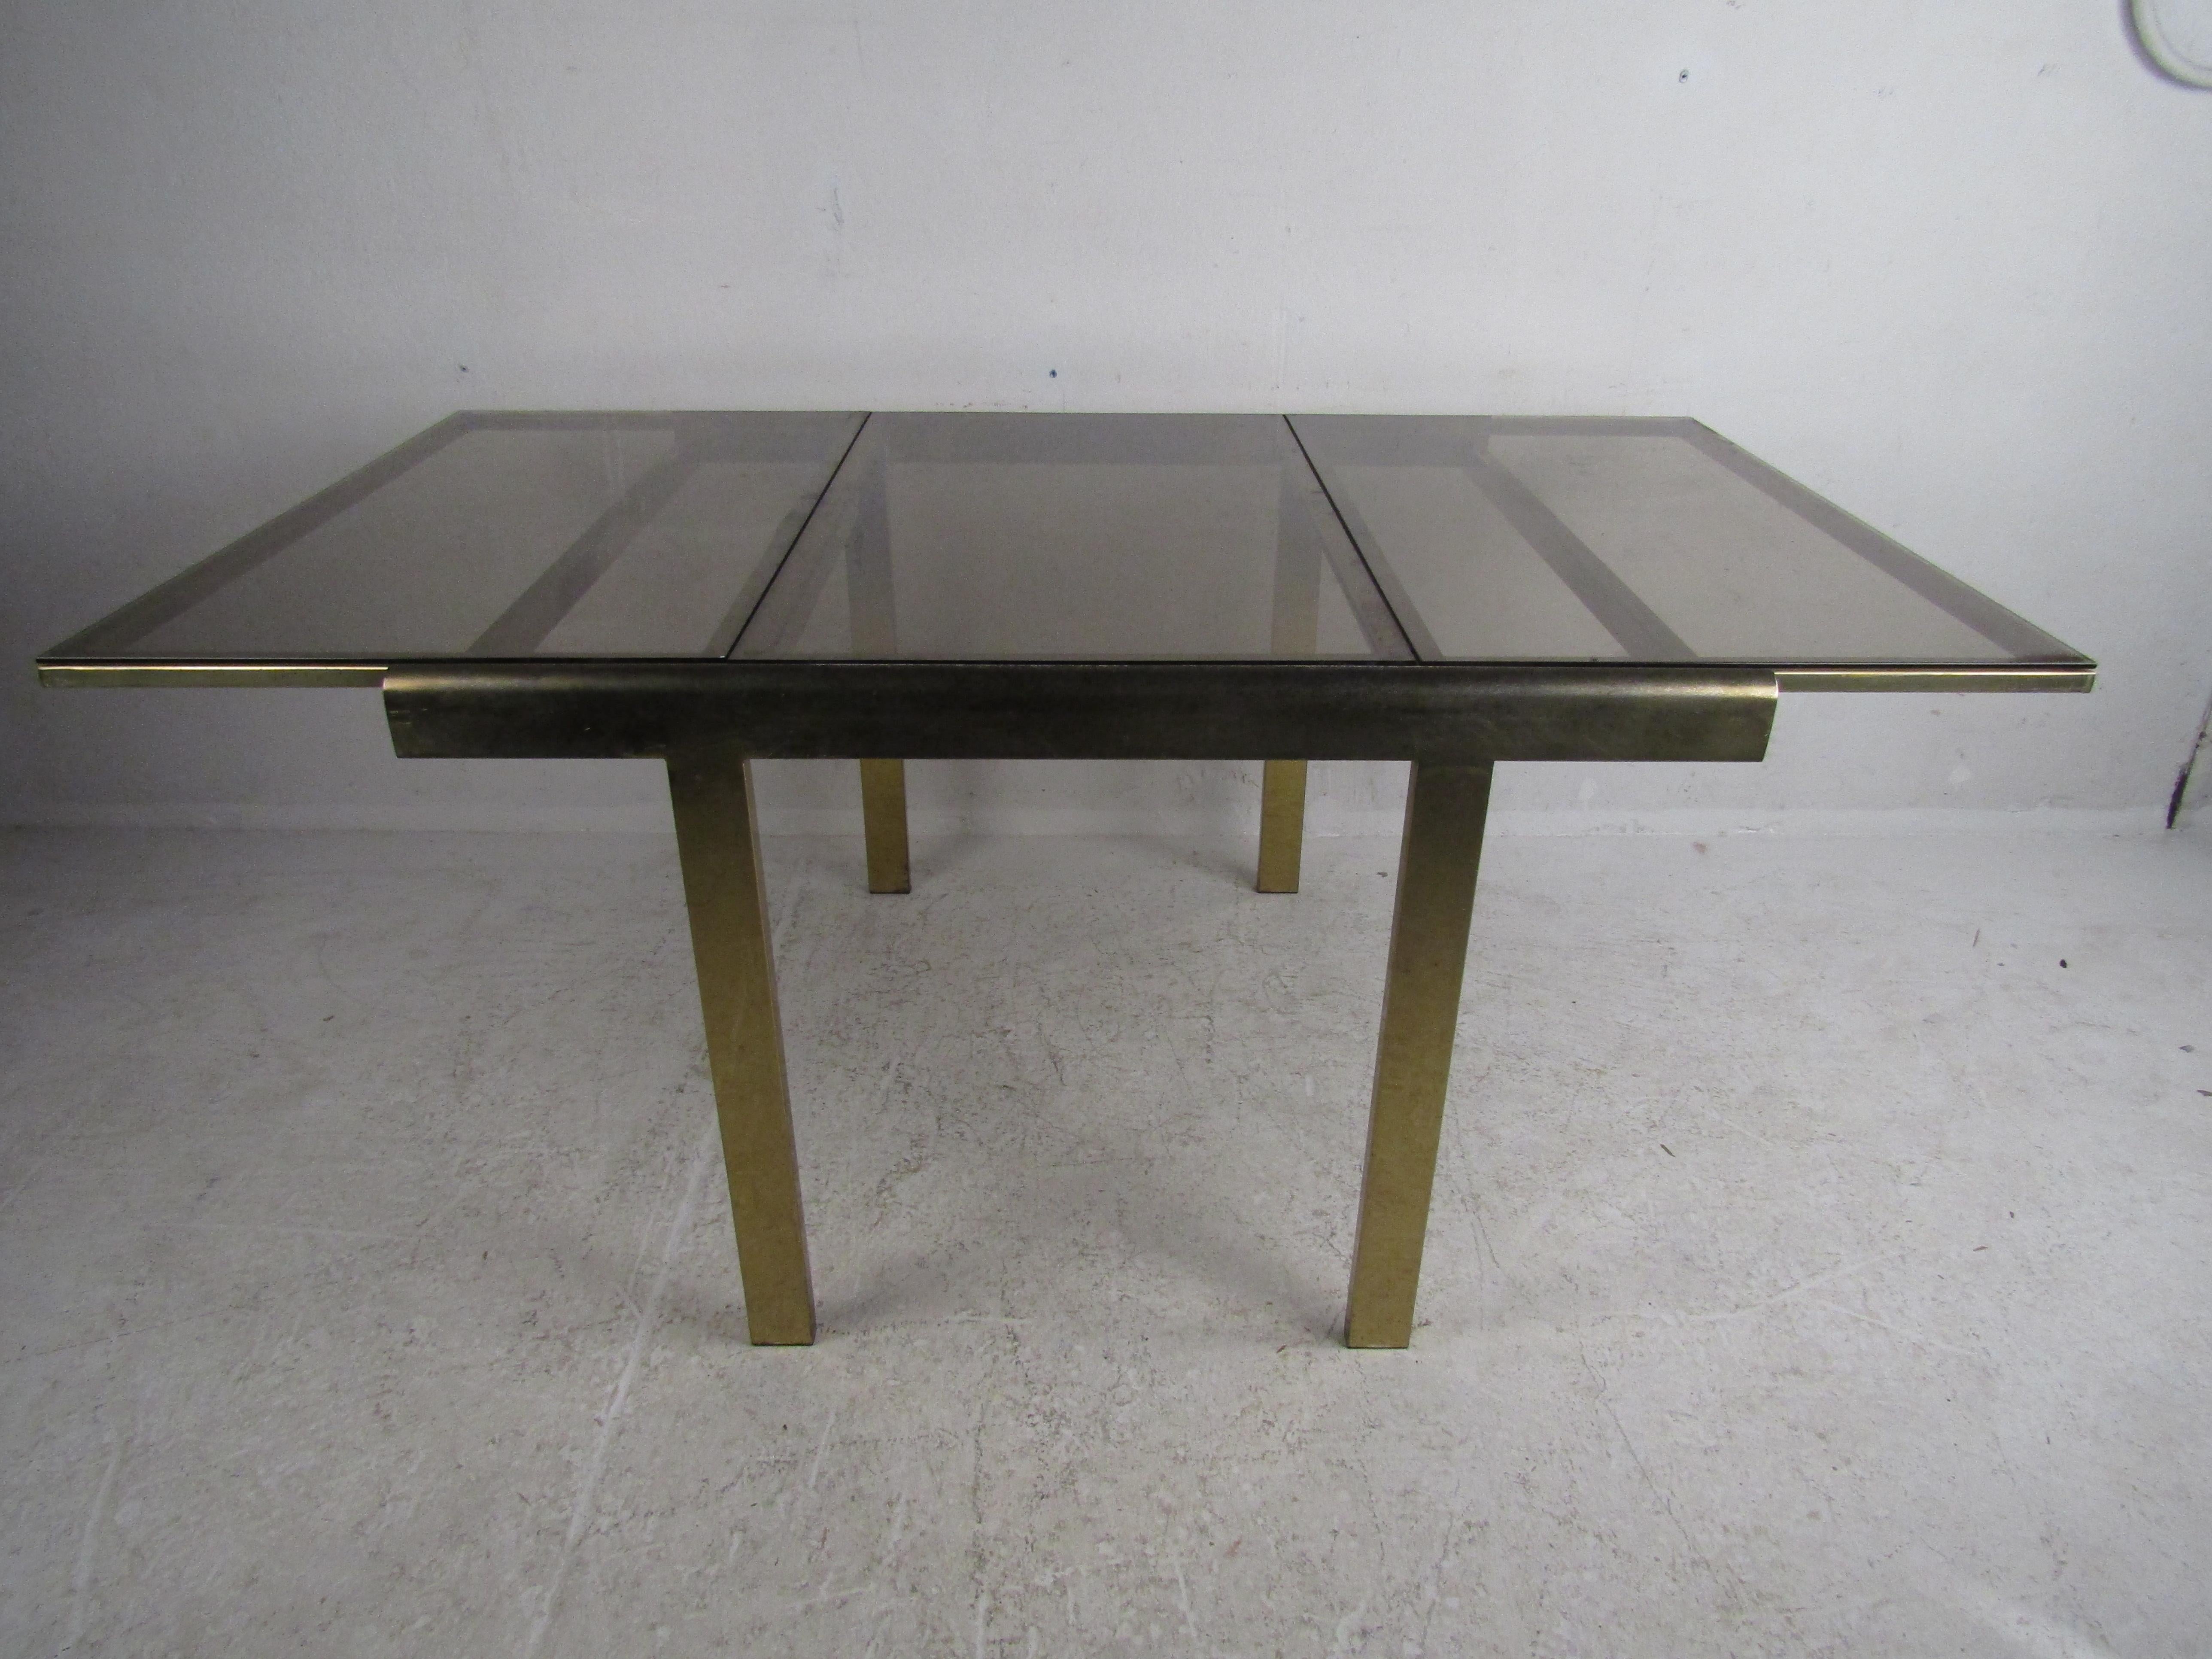 American Mid-Century Modern Expanding Brass Dining Table with a Smoked Glass Top For Sale